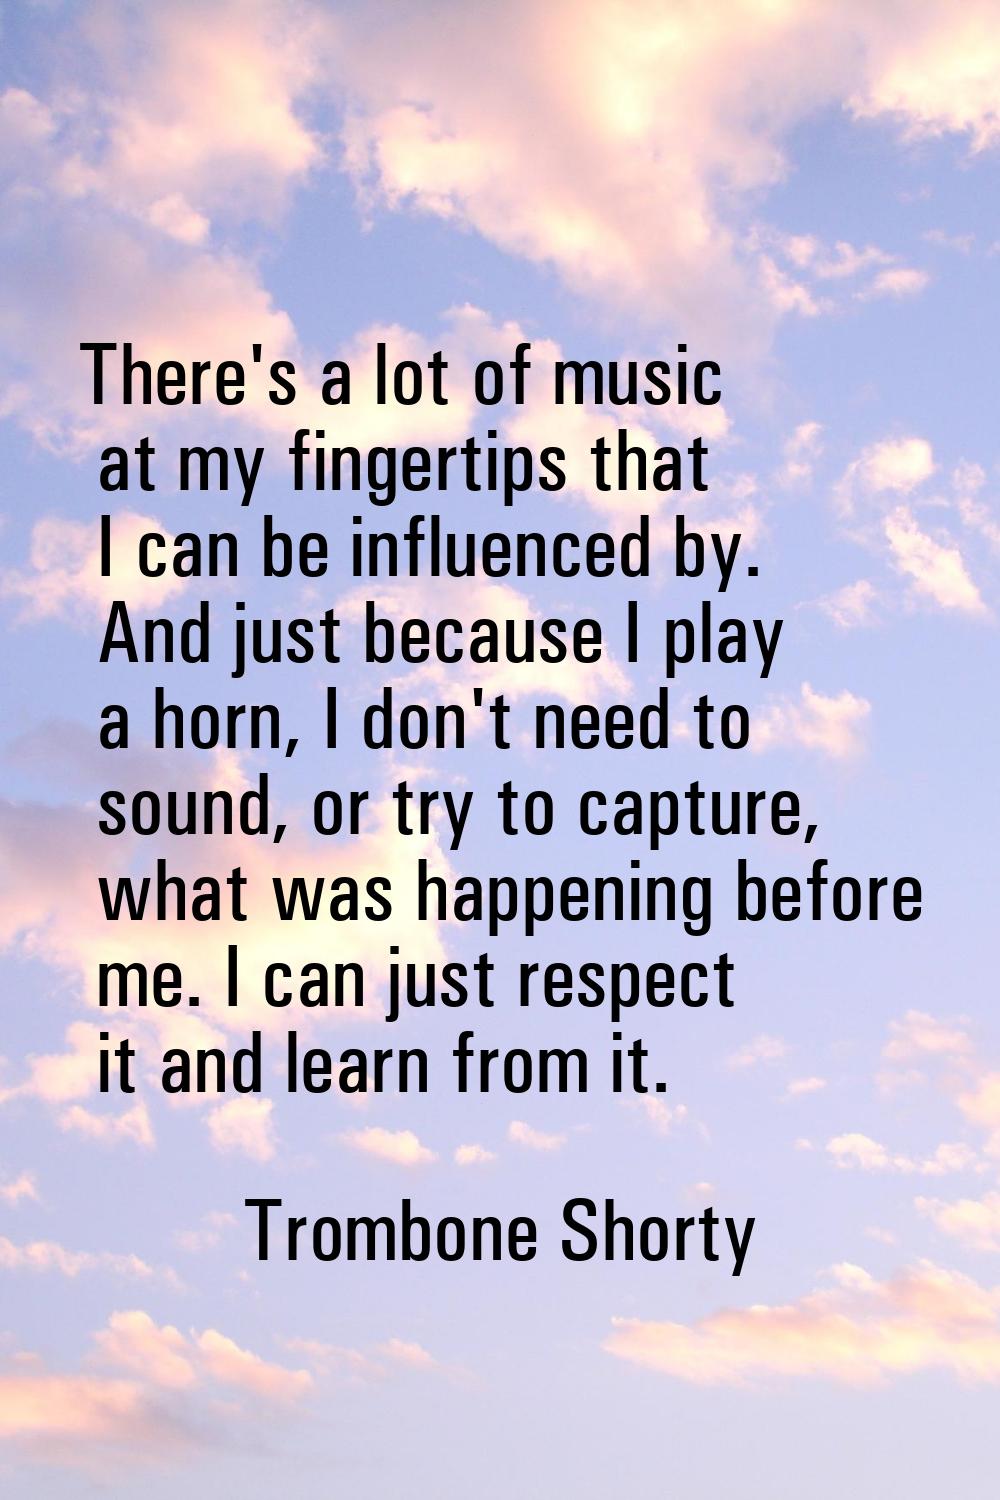 There's a lot of music at my fingertips that I can be influenced by. And just because I play a horn